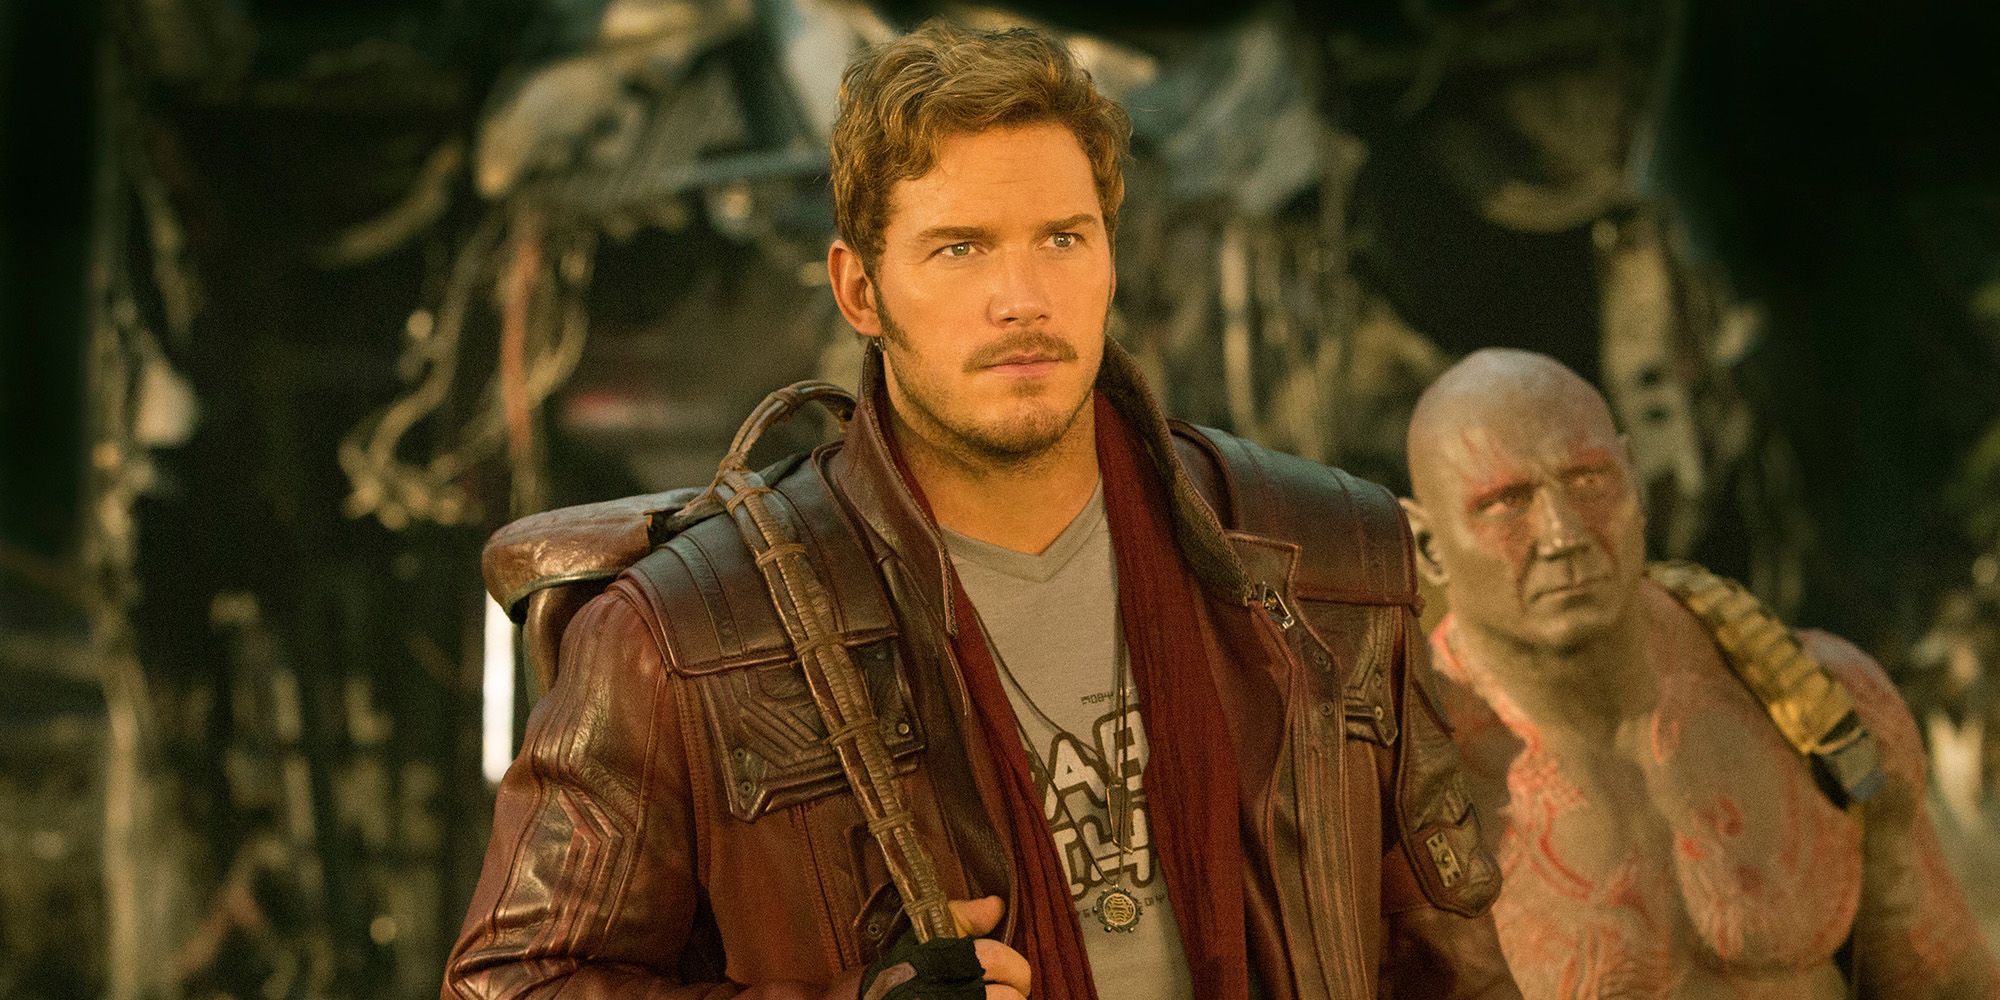 Box Office Prediction: How High Will Guardians of the Galaxy 2 Go?